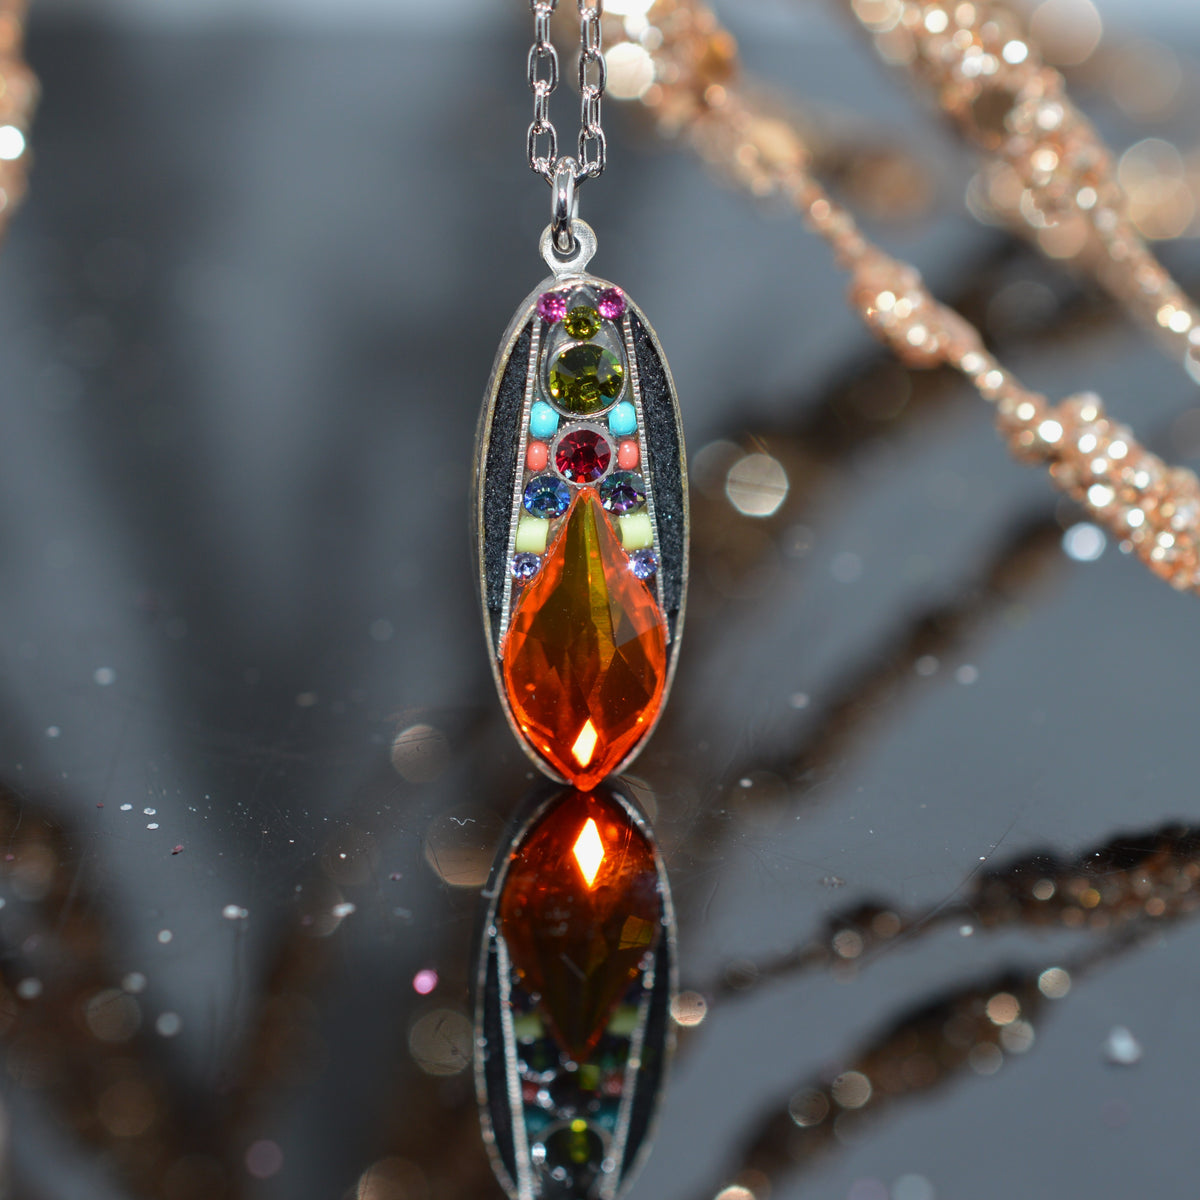 Antique Silver Plated Multi-Color Diva Pendant by Firefly